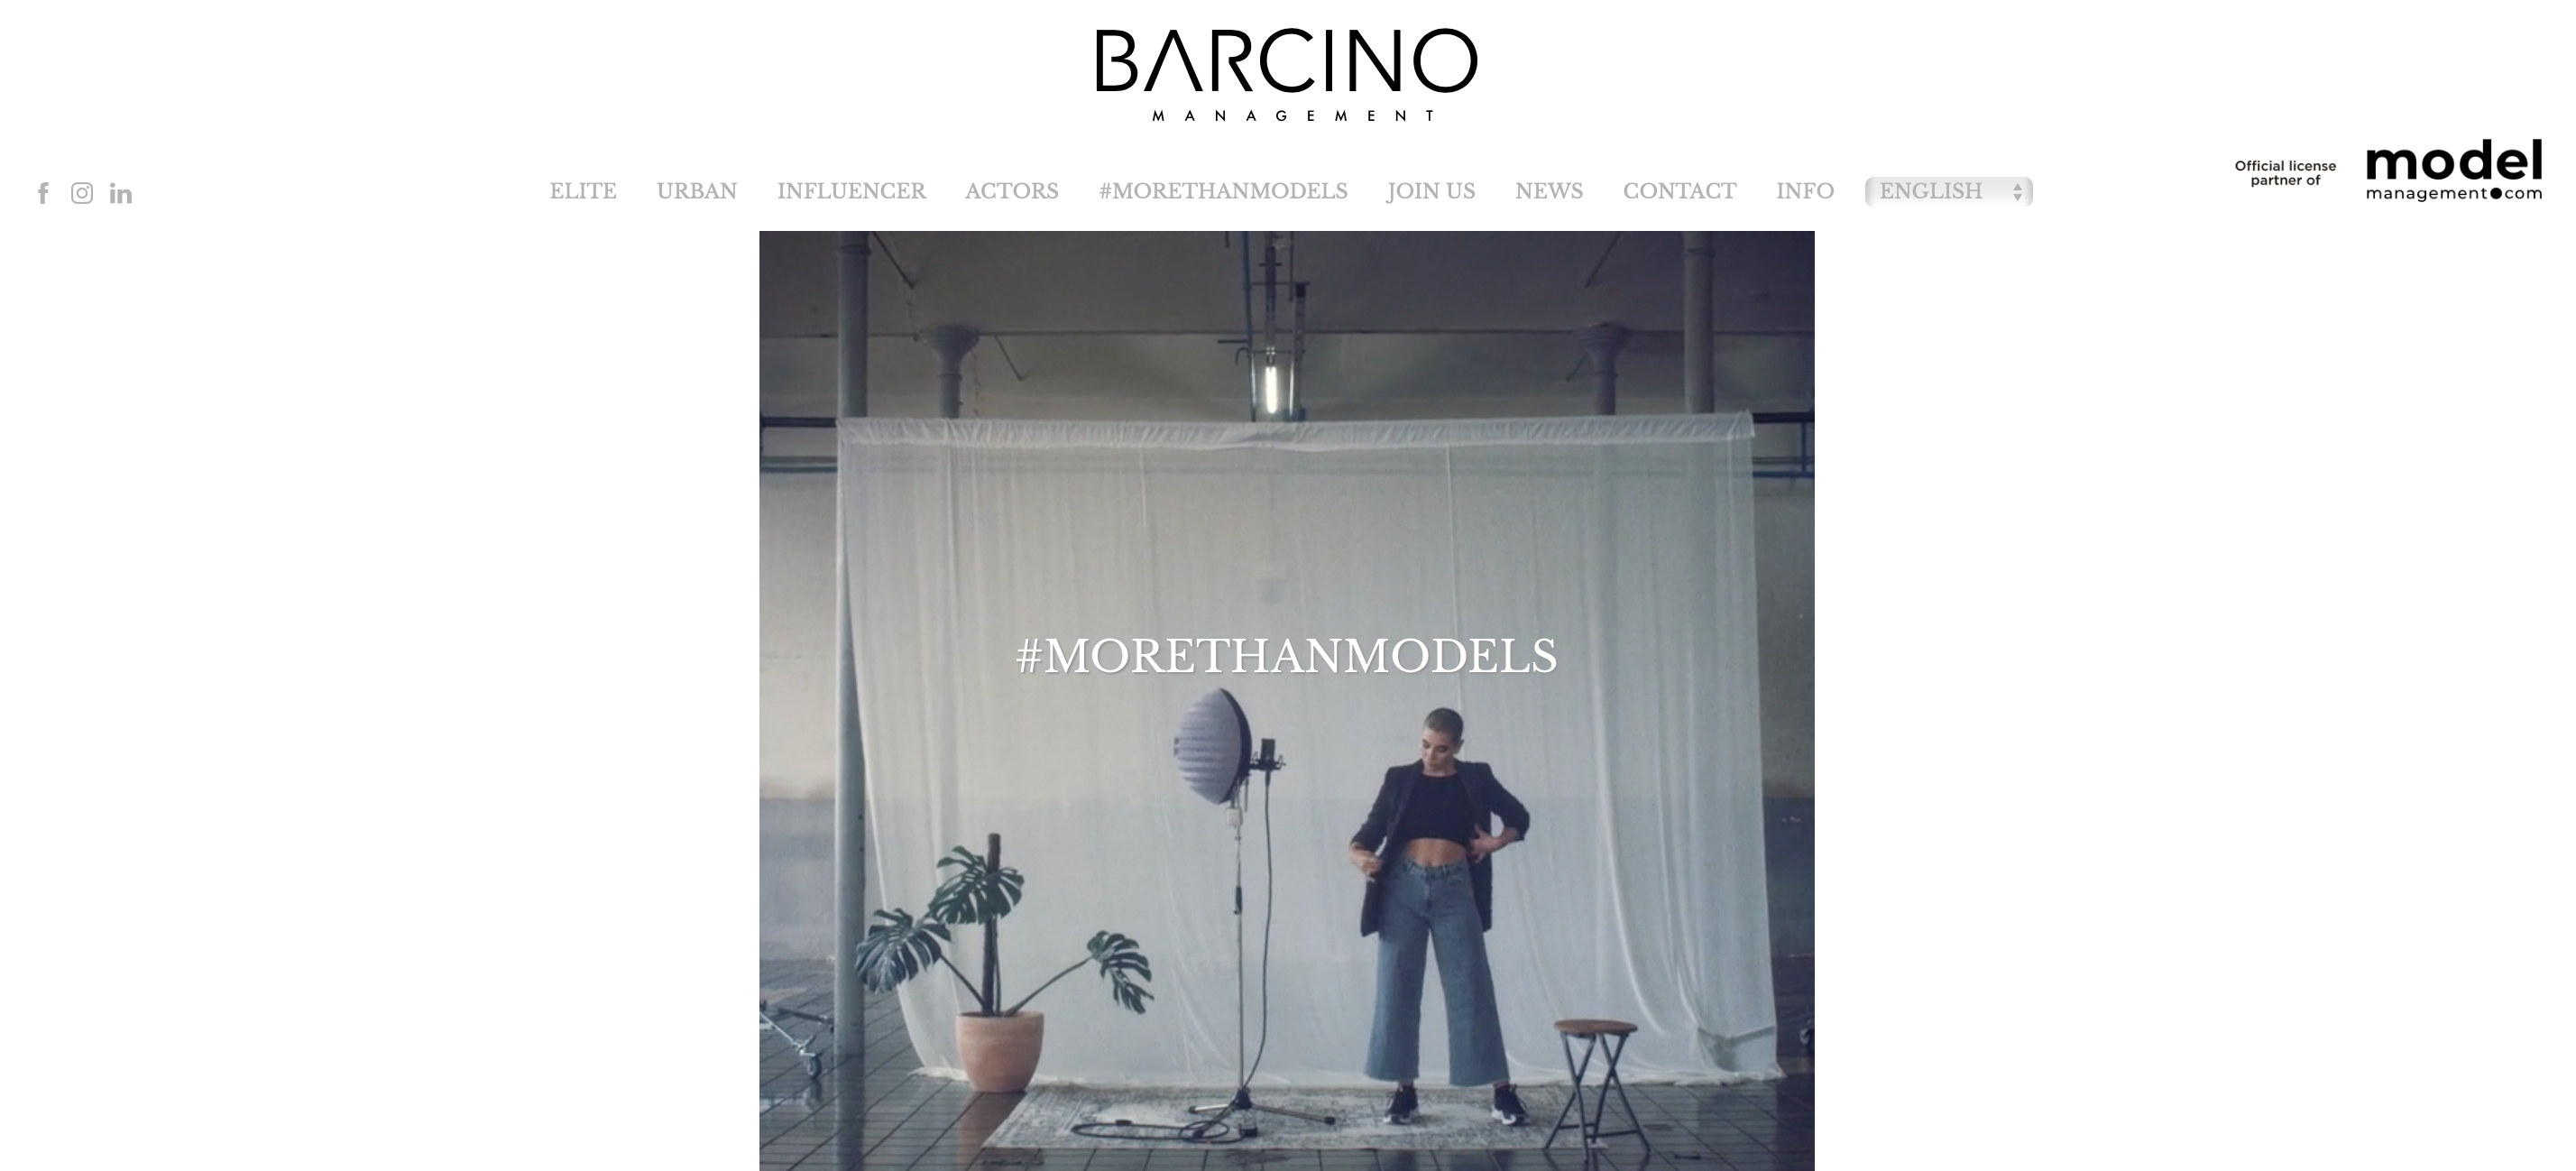 Barcino Management what are modeling agencies looking for